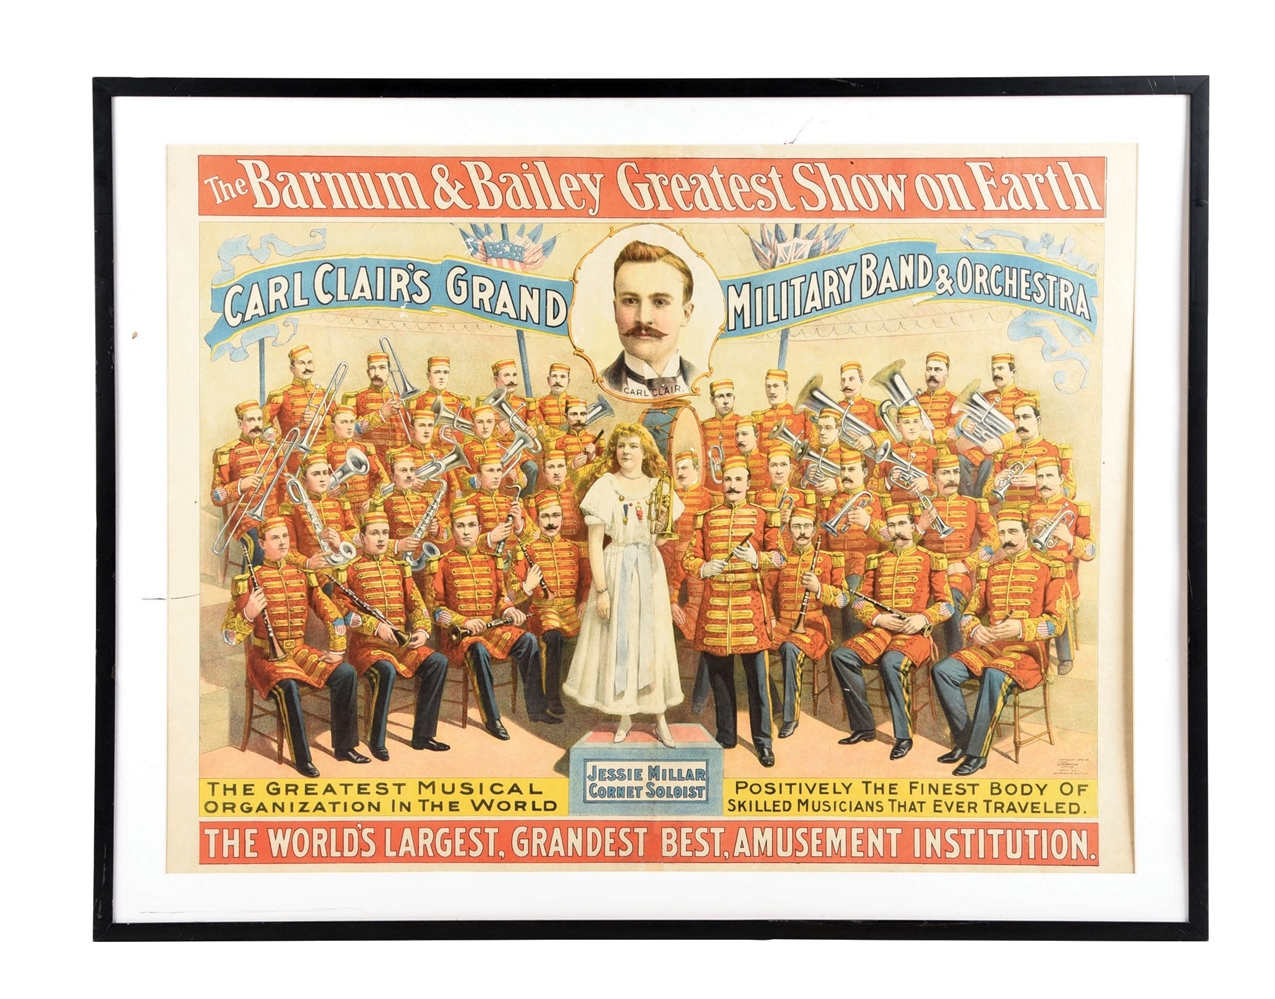 THE BARNUM & BAILEY "GREATEST SHOW ON EARTH" PAPER LITHOGRAPH POSTER W/ CARL CLAIRES GRAND MILITARY BAND & ORCHESTRA GRAPHIC